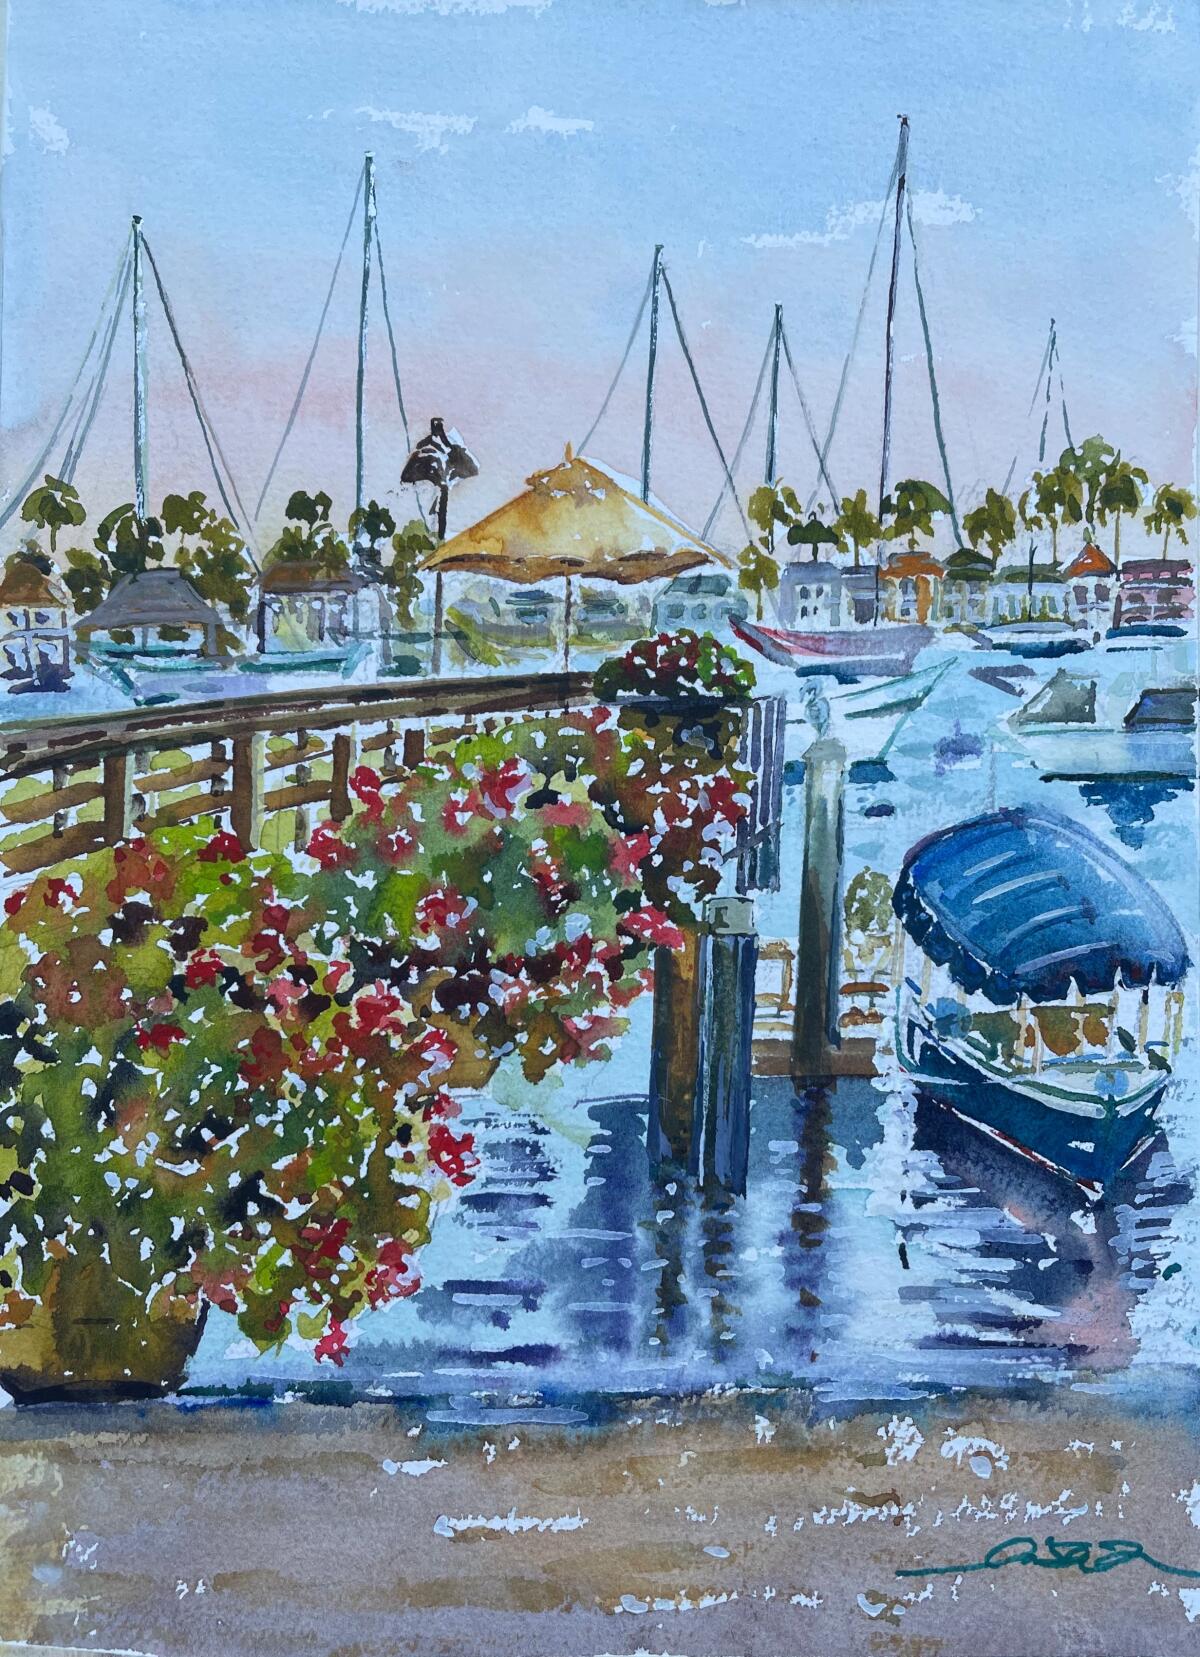 Artist Lisa Fu's painting of Balboa Island will be among the works shown at the Art in the Park on Sept. 23.